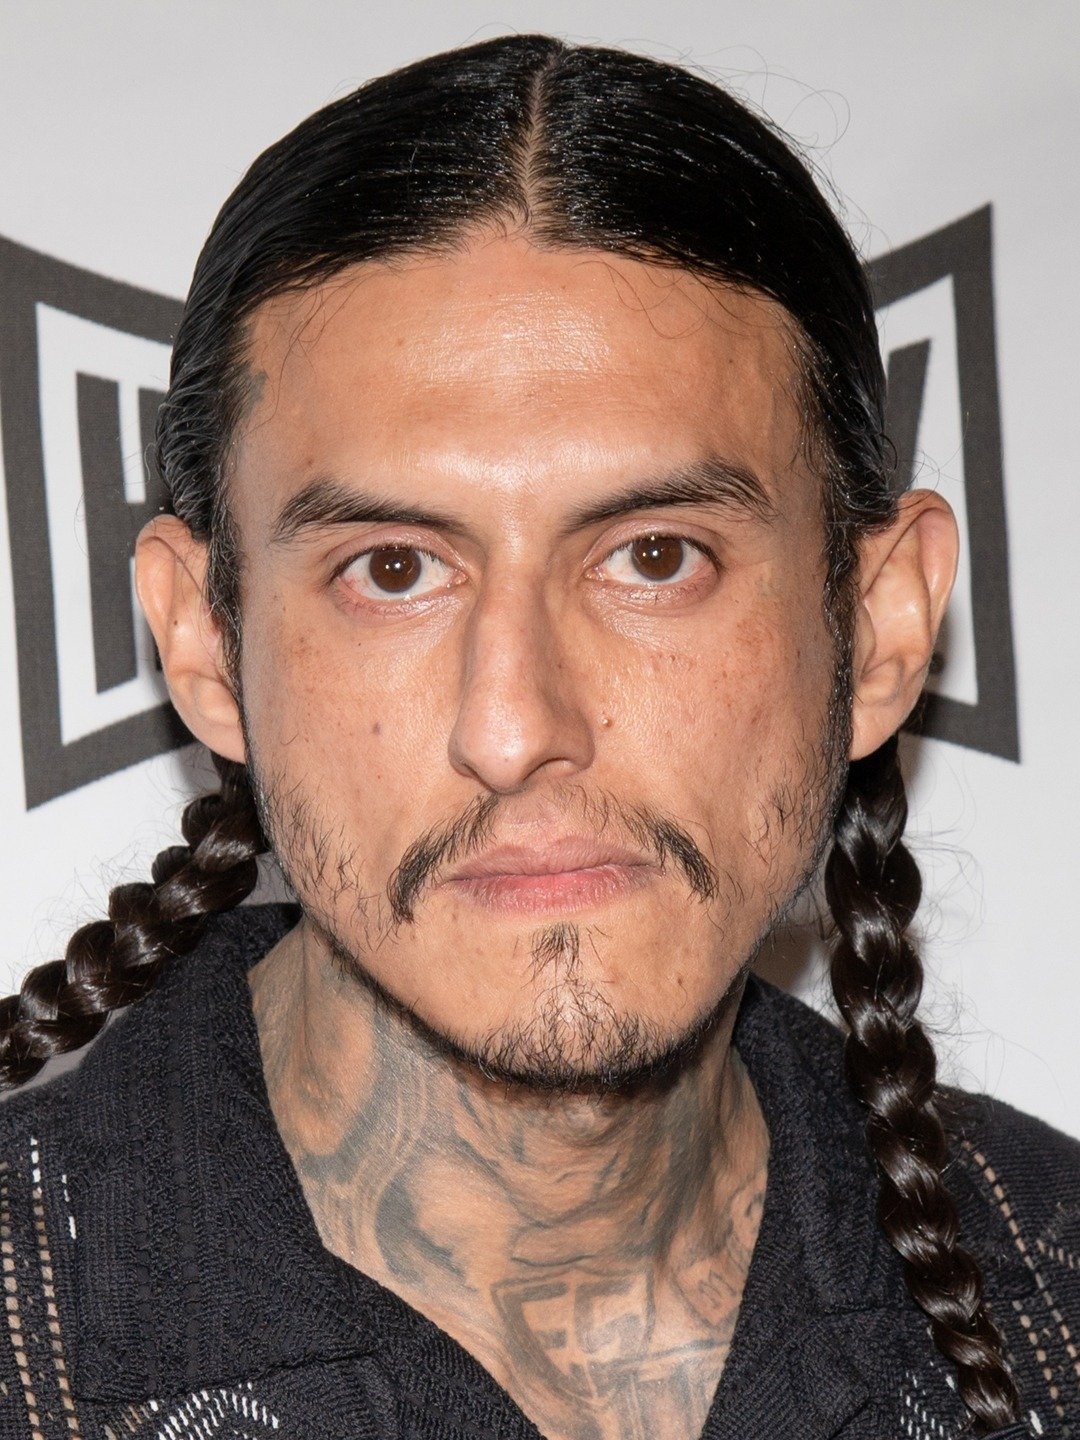 Twisted Metal Is About to Get Loud as Richard Cabral Joins Cast